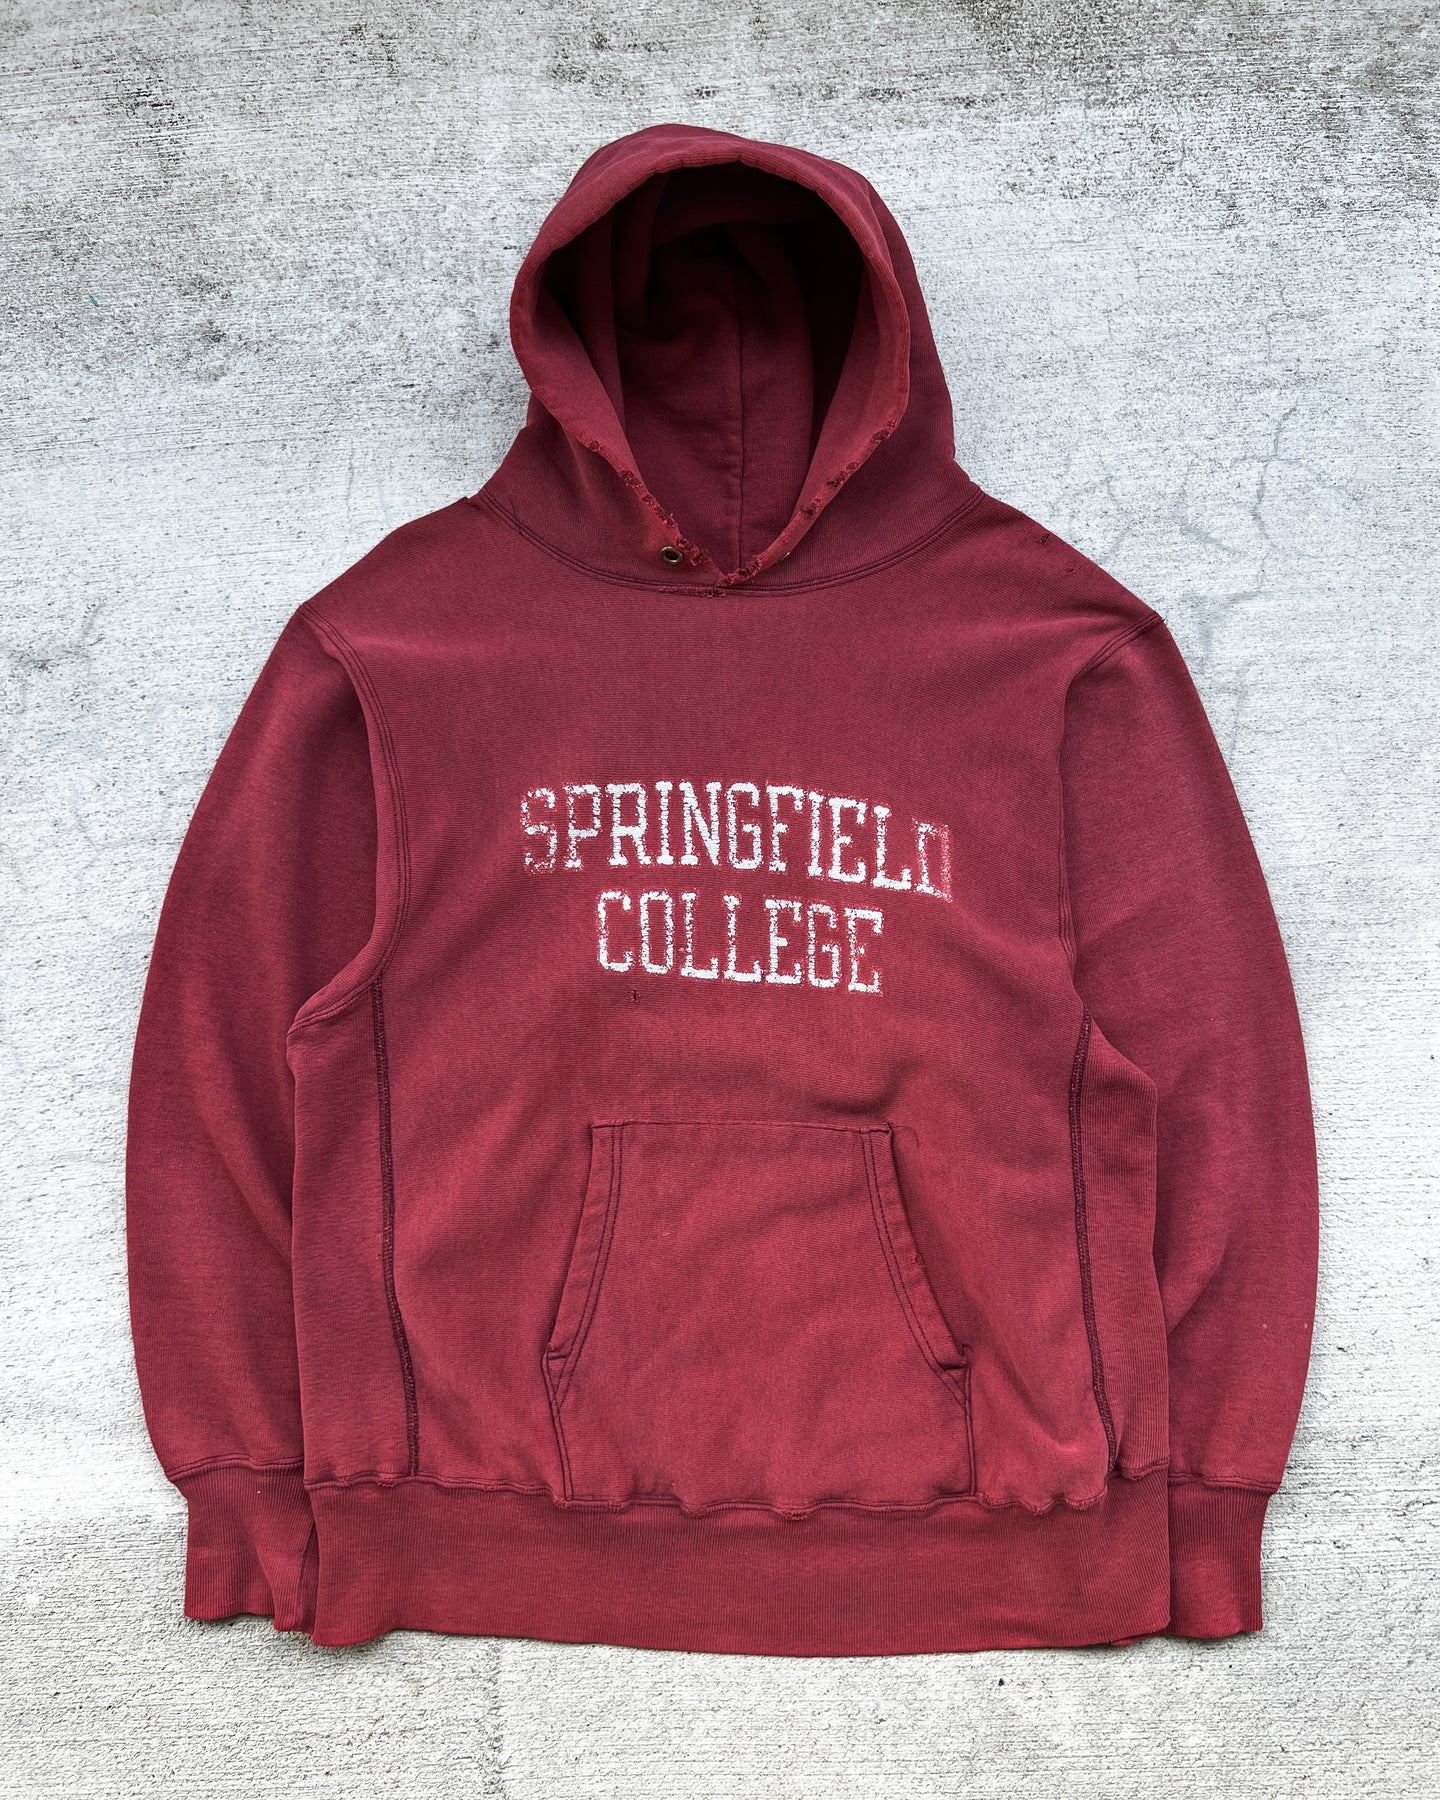 1980s Champion Springfield College Reverse Weave Hoodie - Size X-Large